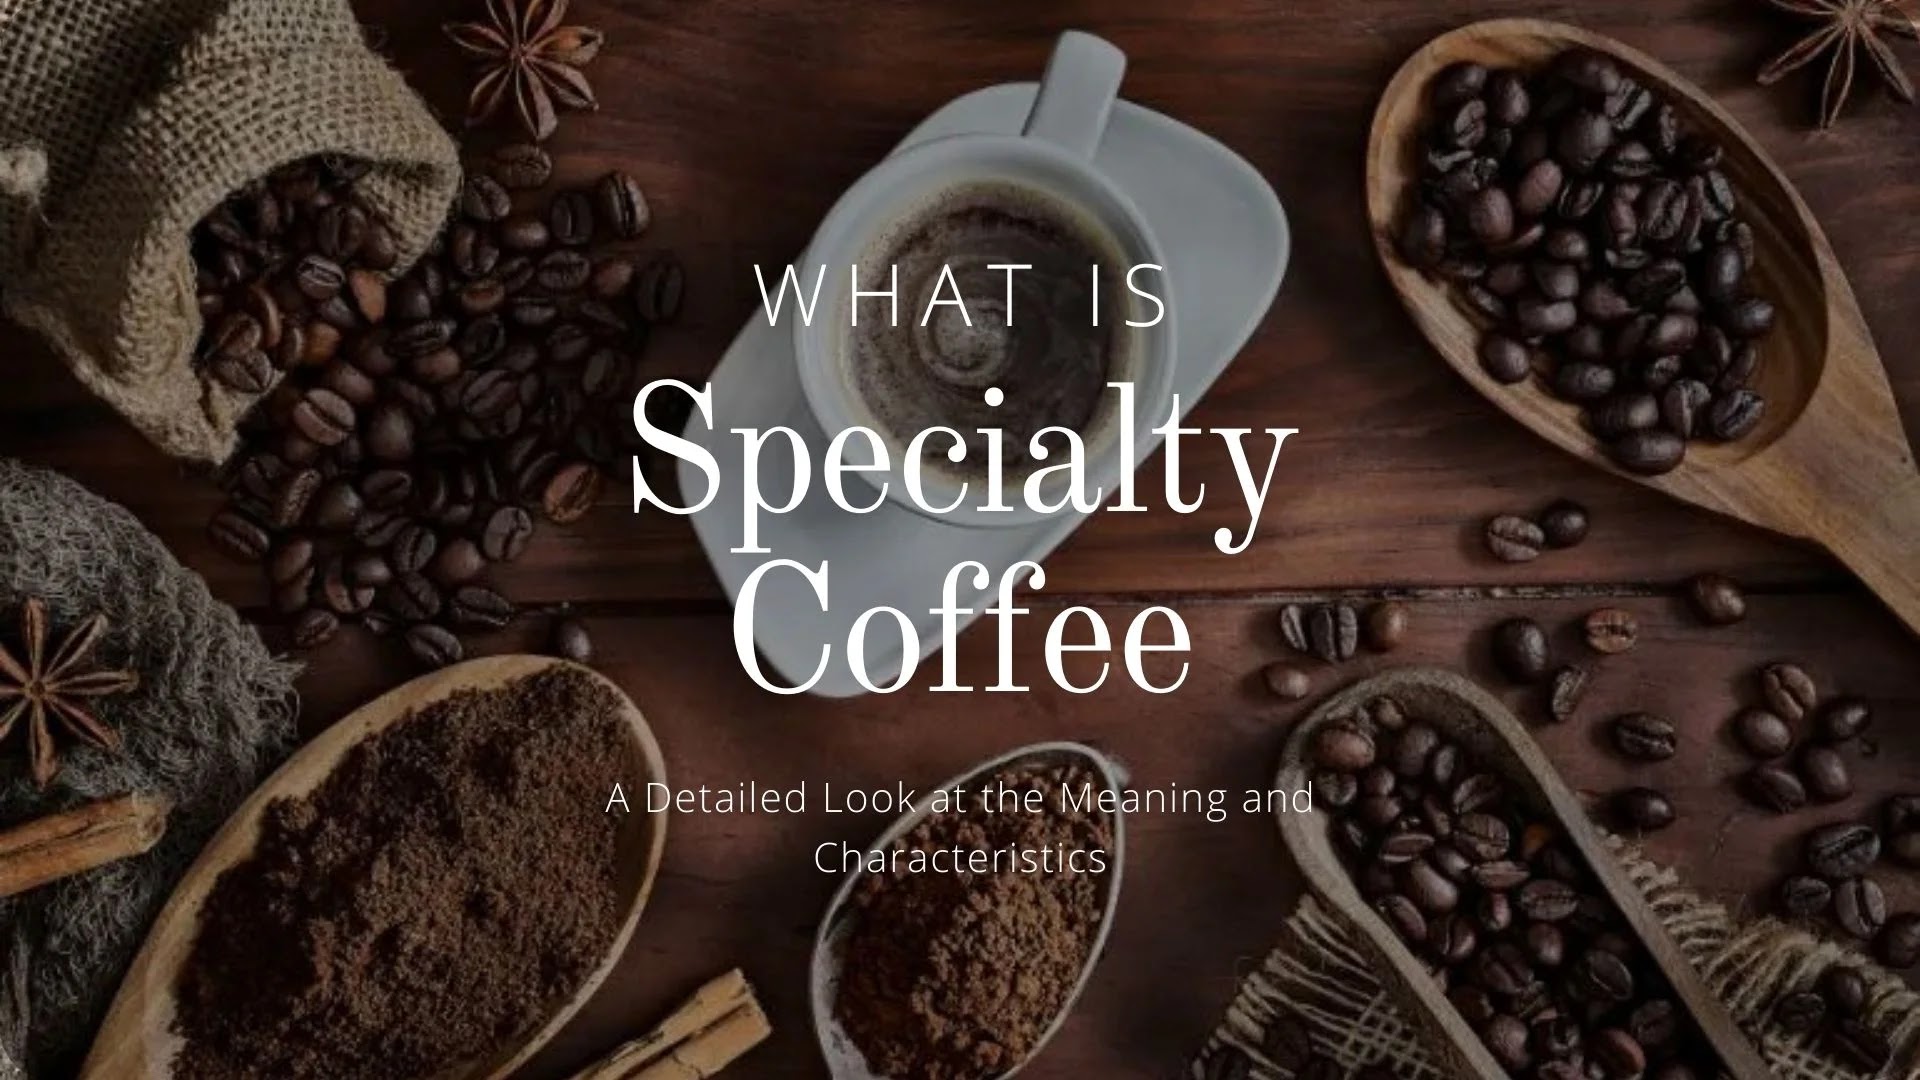 Specialty coffee has become increasingly popular in recent years, with more and more coffee drinkers seeking out higher-quality beans and brews.